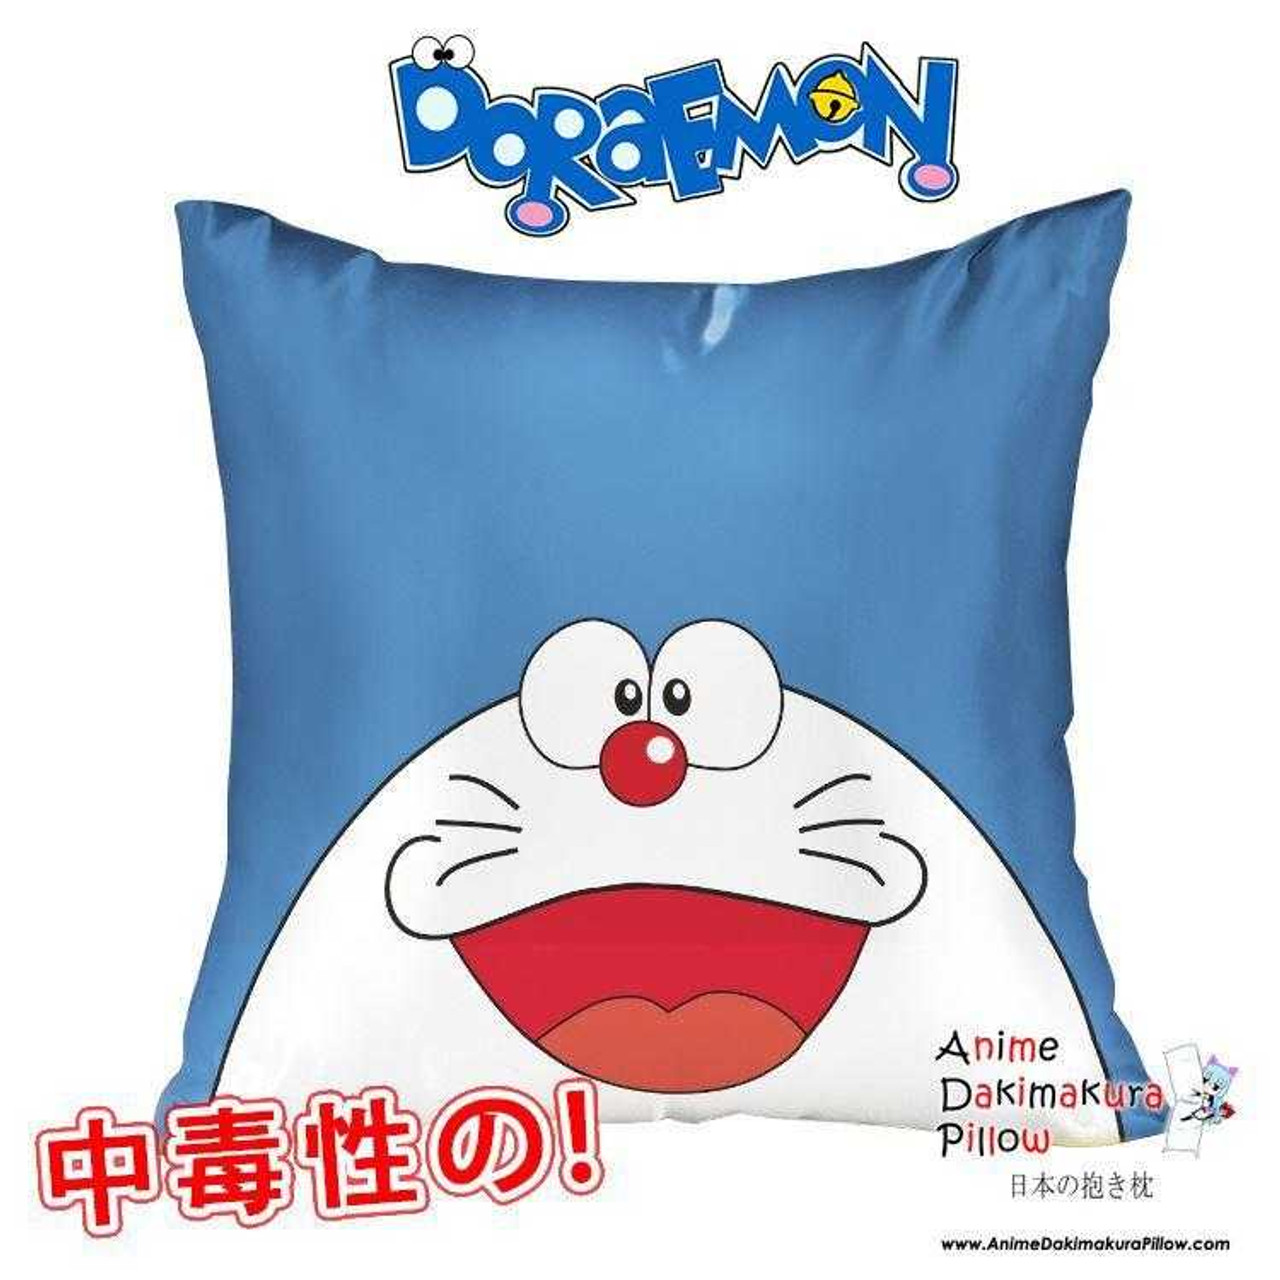 Buy Non-Woven Cushion Filler, White - 40x40 cm Online in UAE (Save